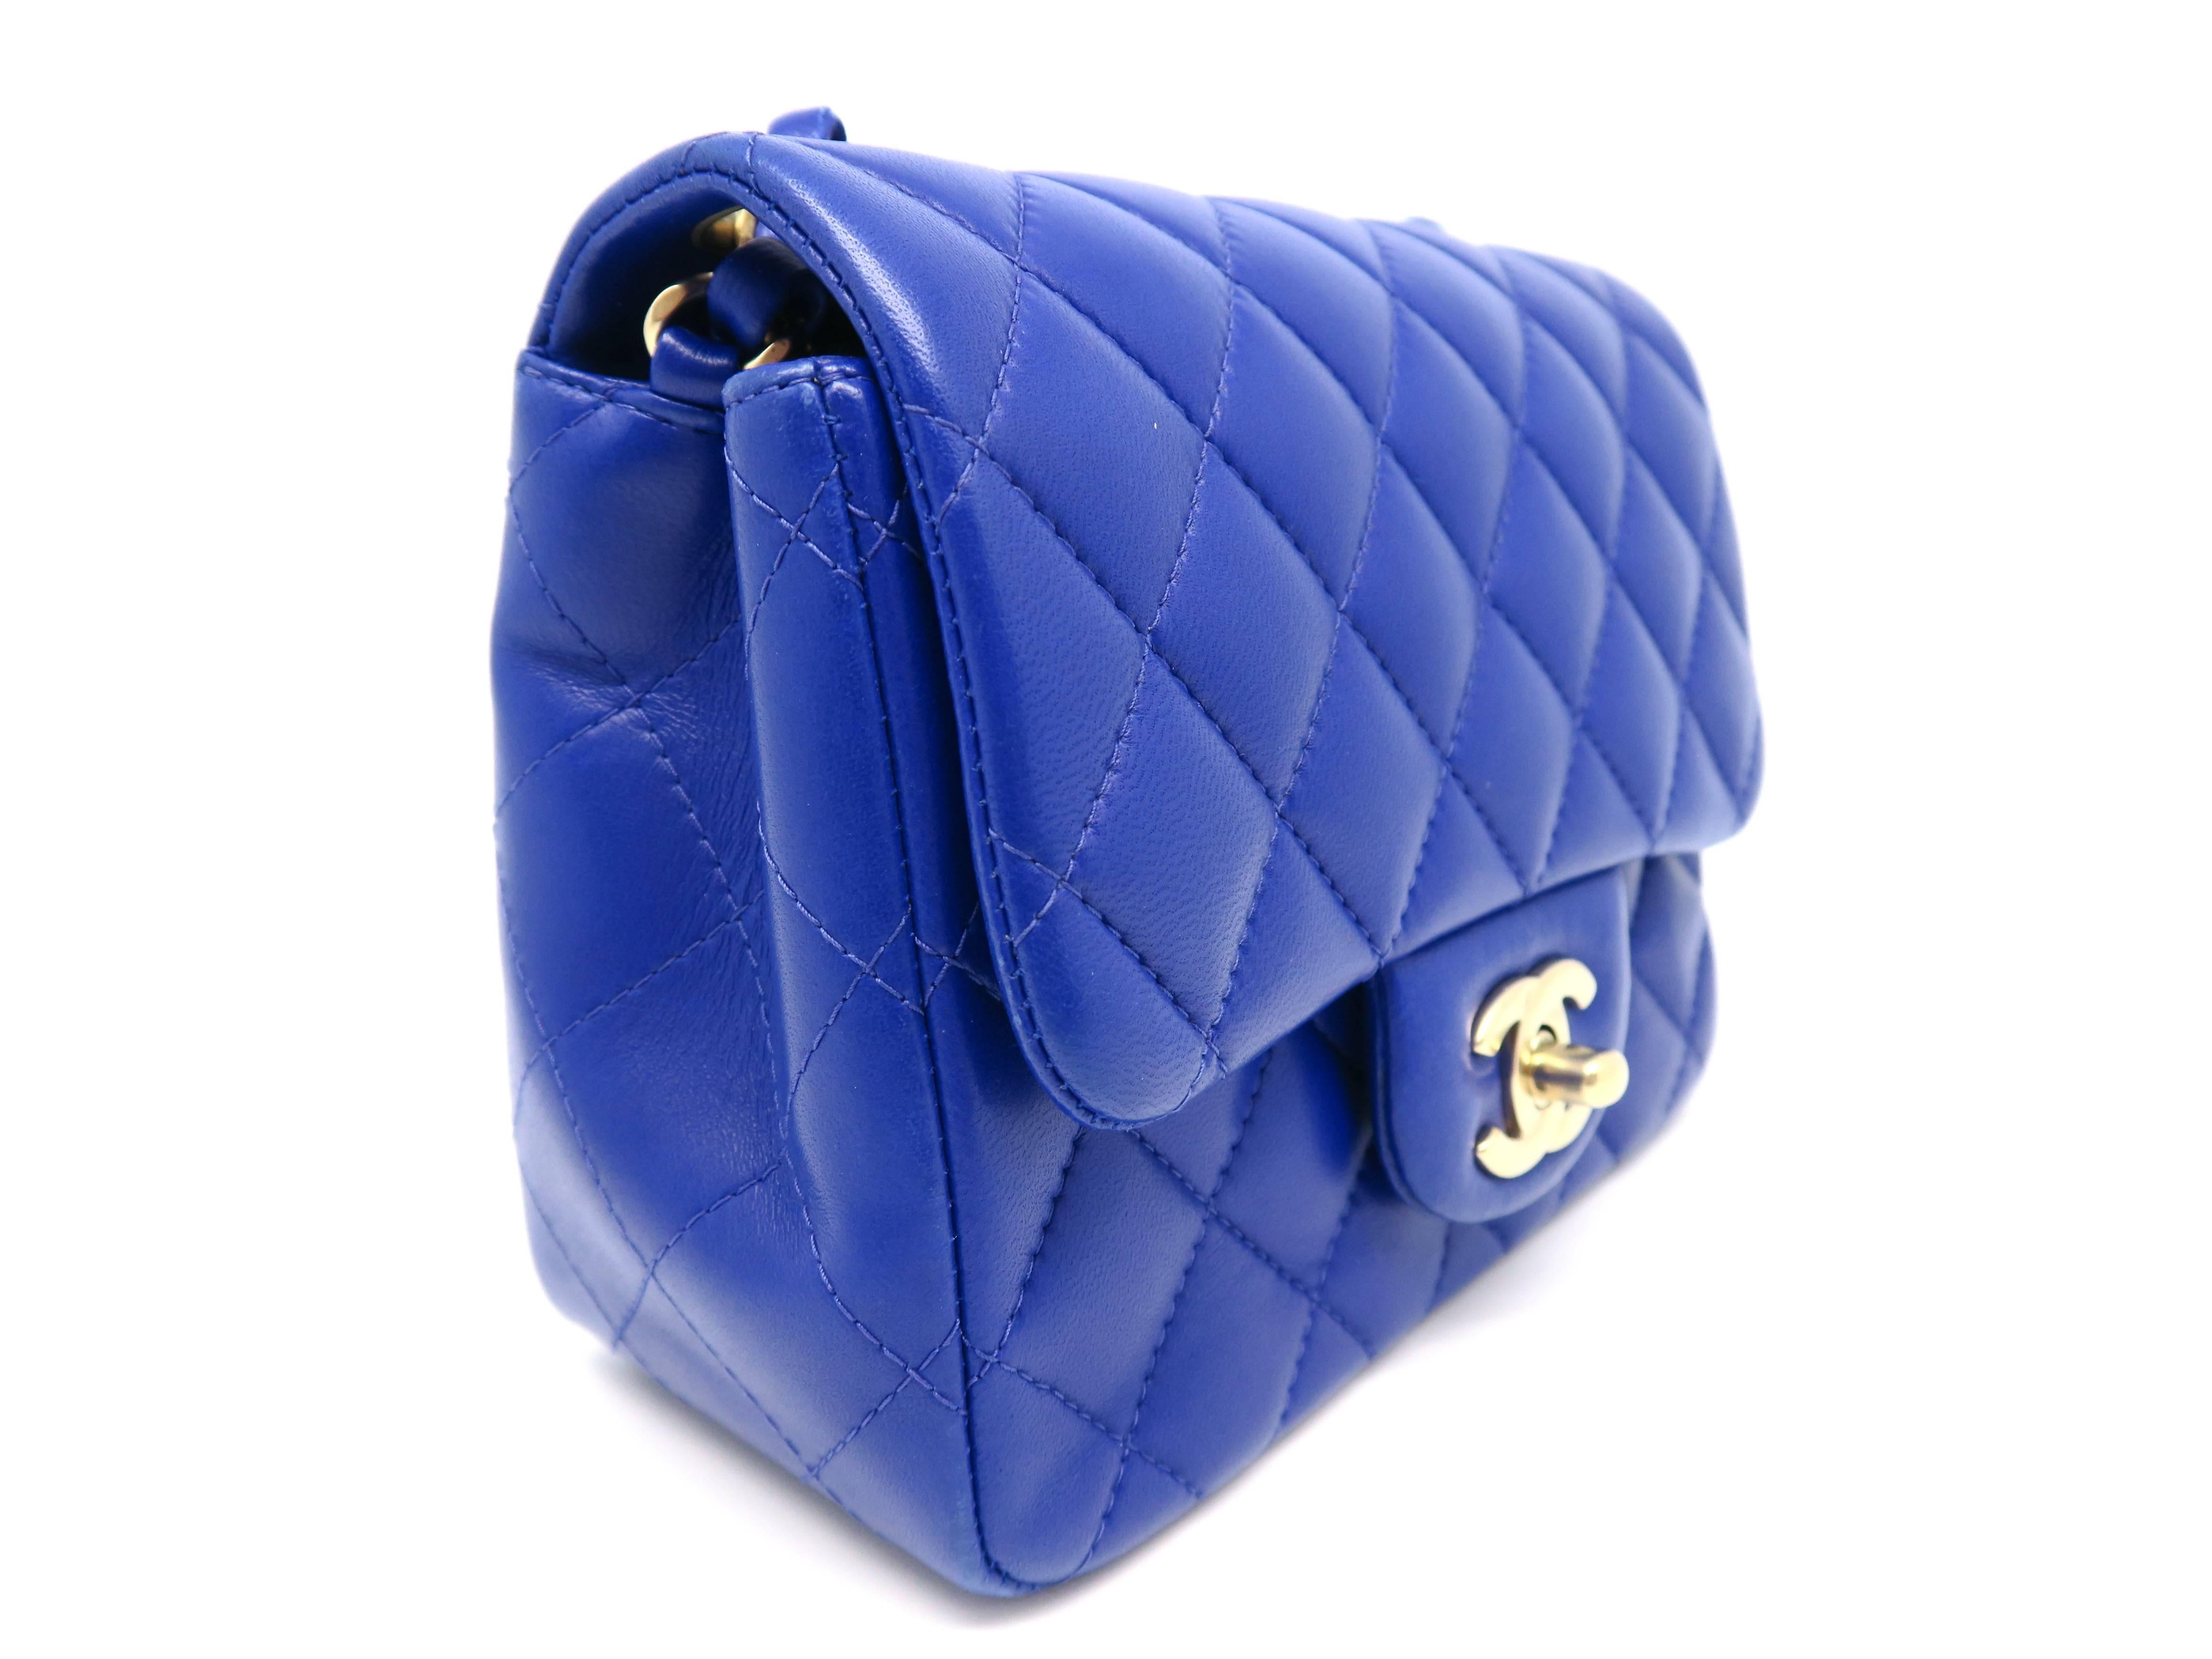 Color: Blue

Material: Quilted Lambskin Leather 

Condition: Rank A
Overall: Good, few minor defects
Surface: Minor Scratches & Stains
Corners: Minor Scratches
Edges: Good
Handles/Straps: Minor Stains
Hardware: Minor Scratches
Inside: Minor